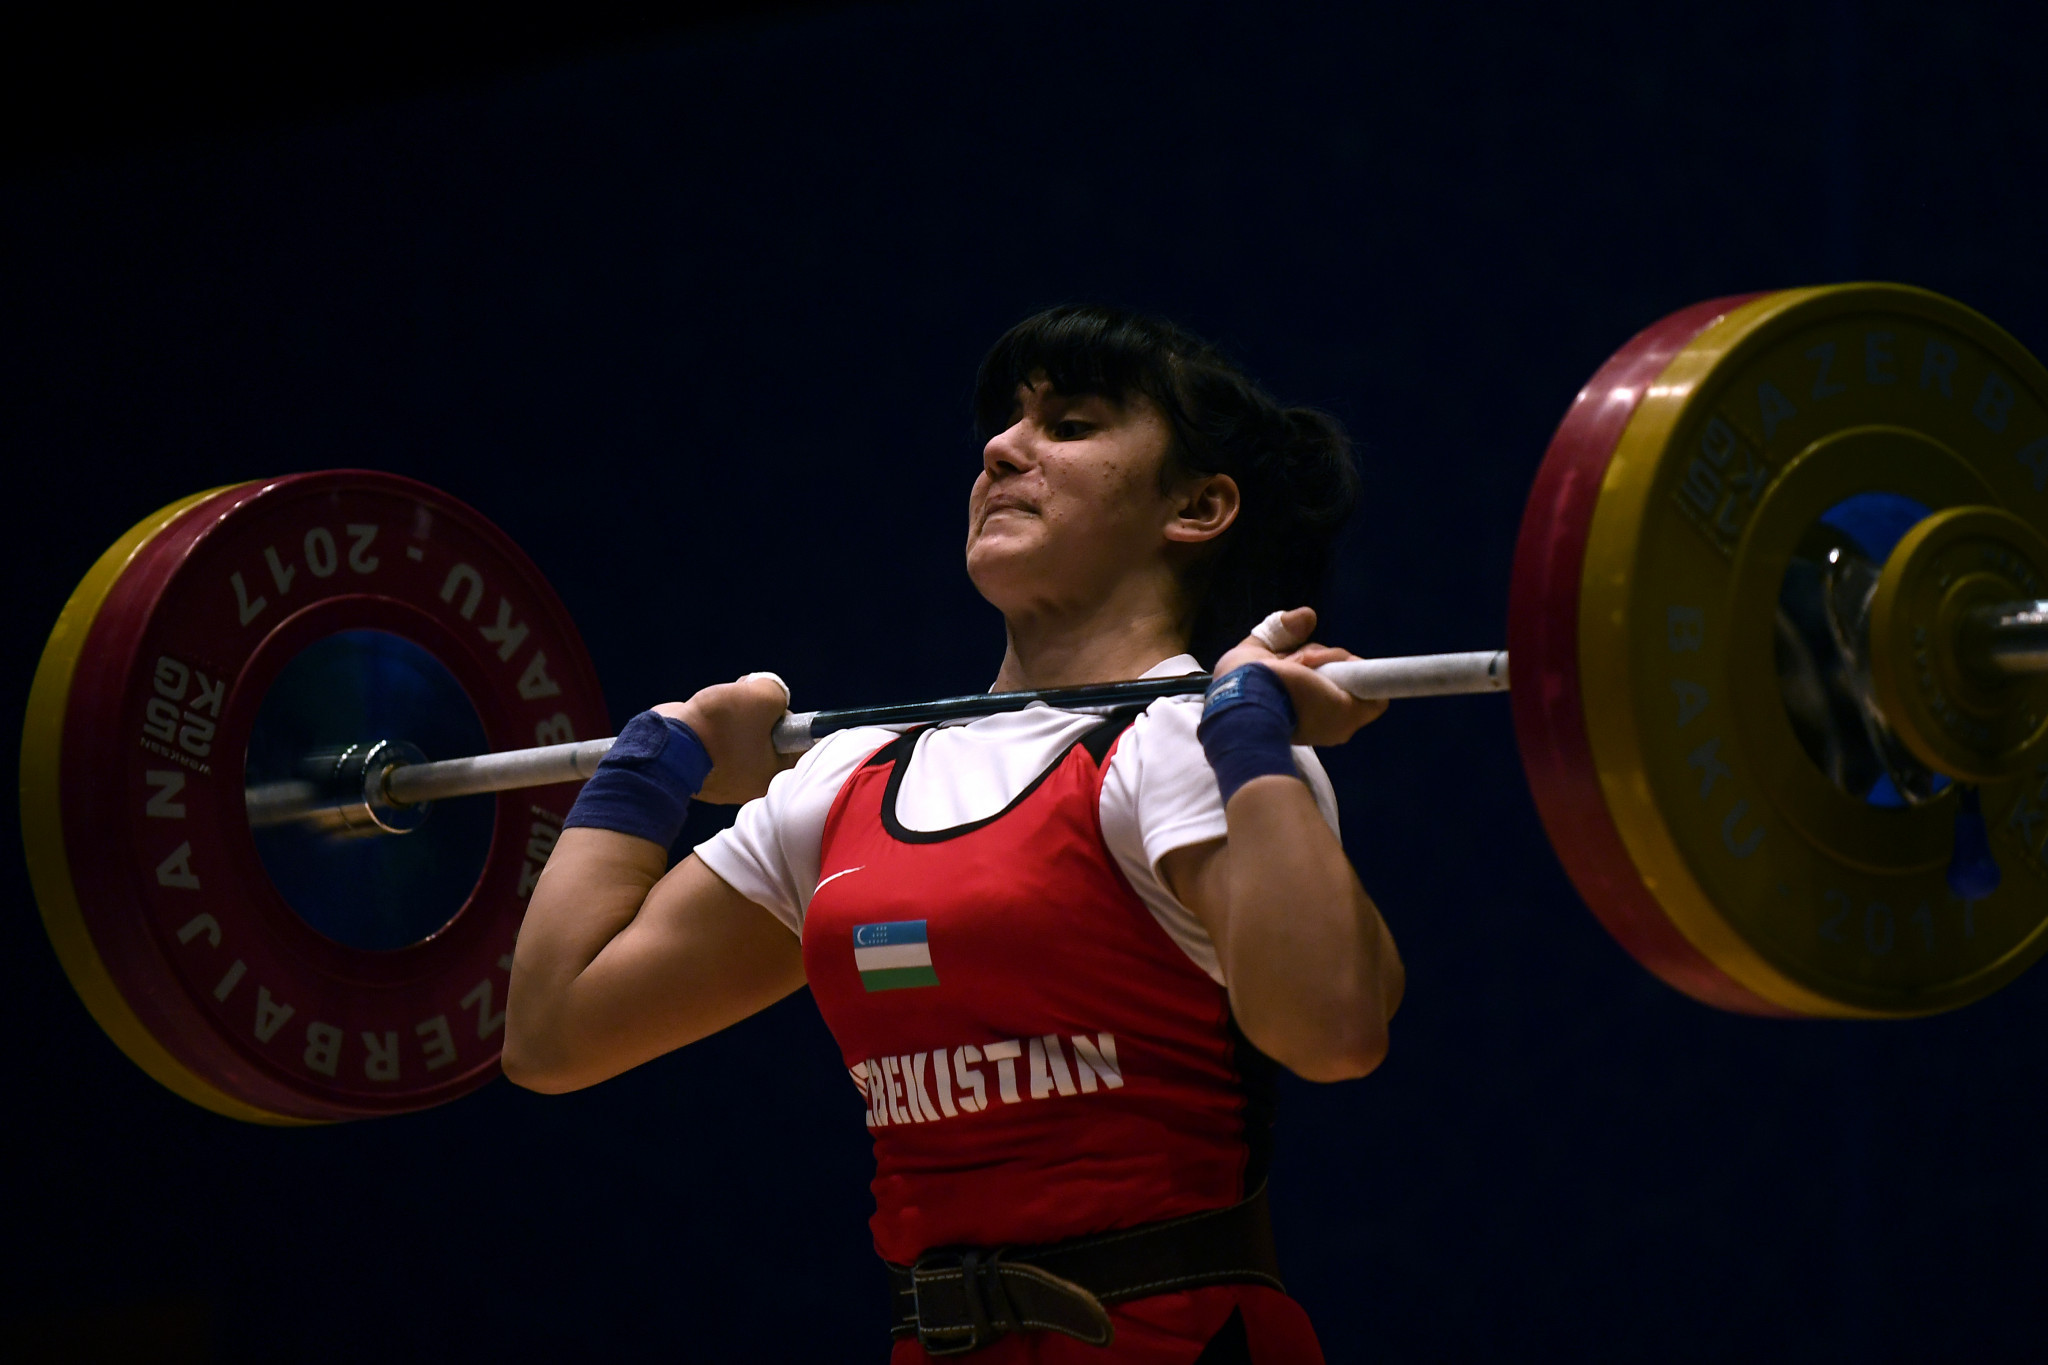 Kumushkhon Fayzullaeva won the hat-trick of overall, snatch and clean and jerk titles in the women's 64 kilograms division ©Getty Images